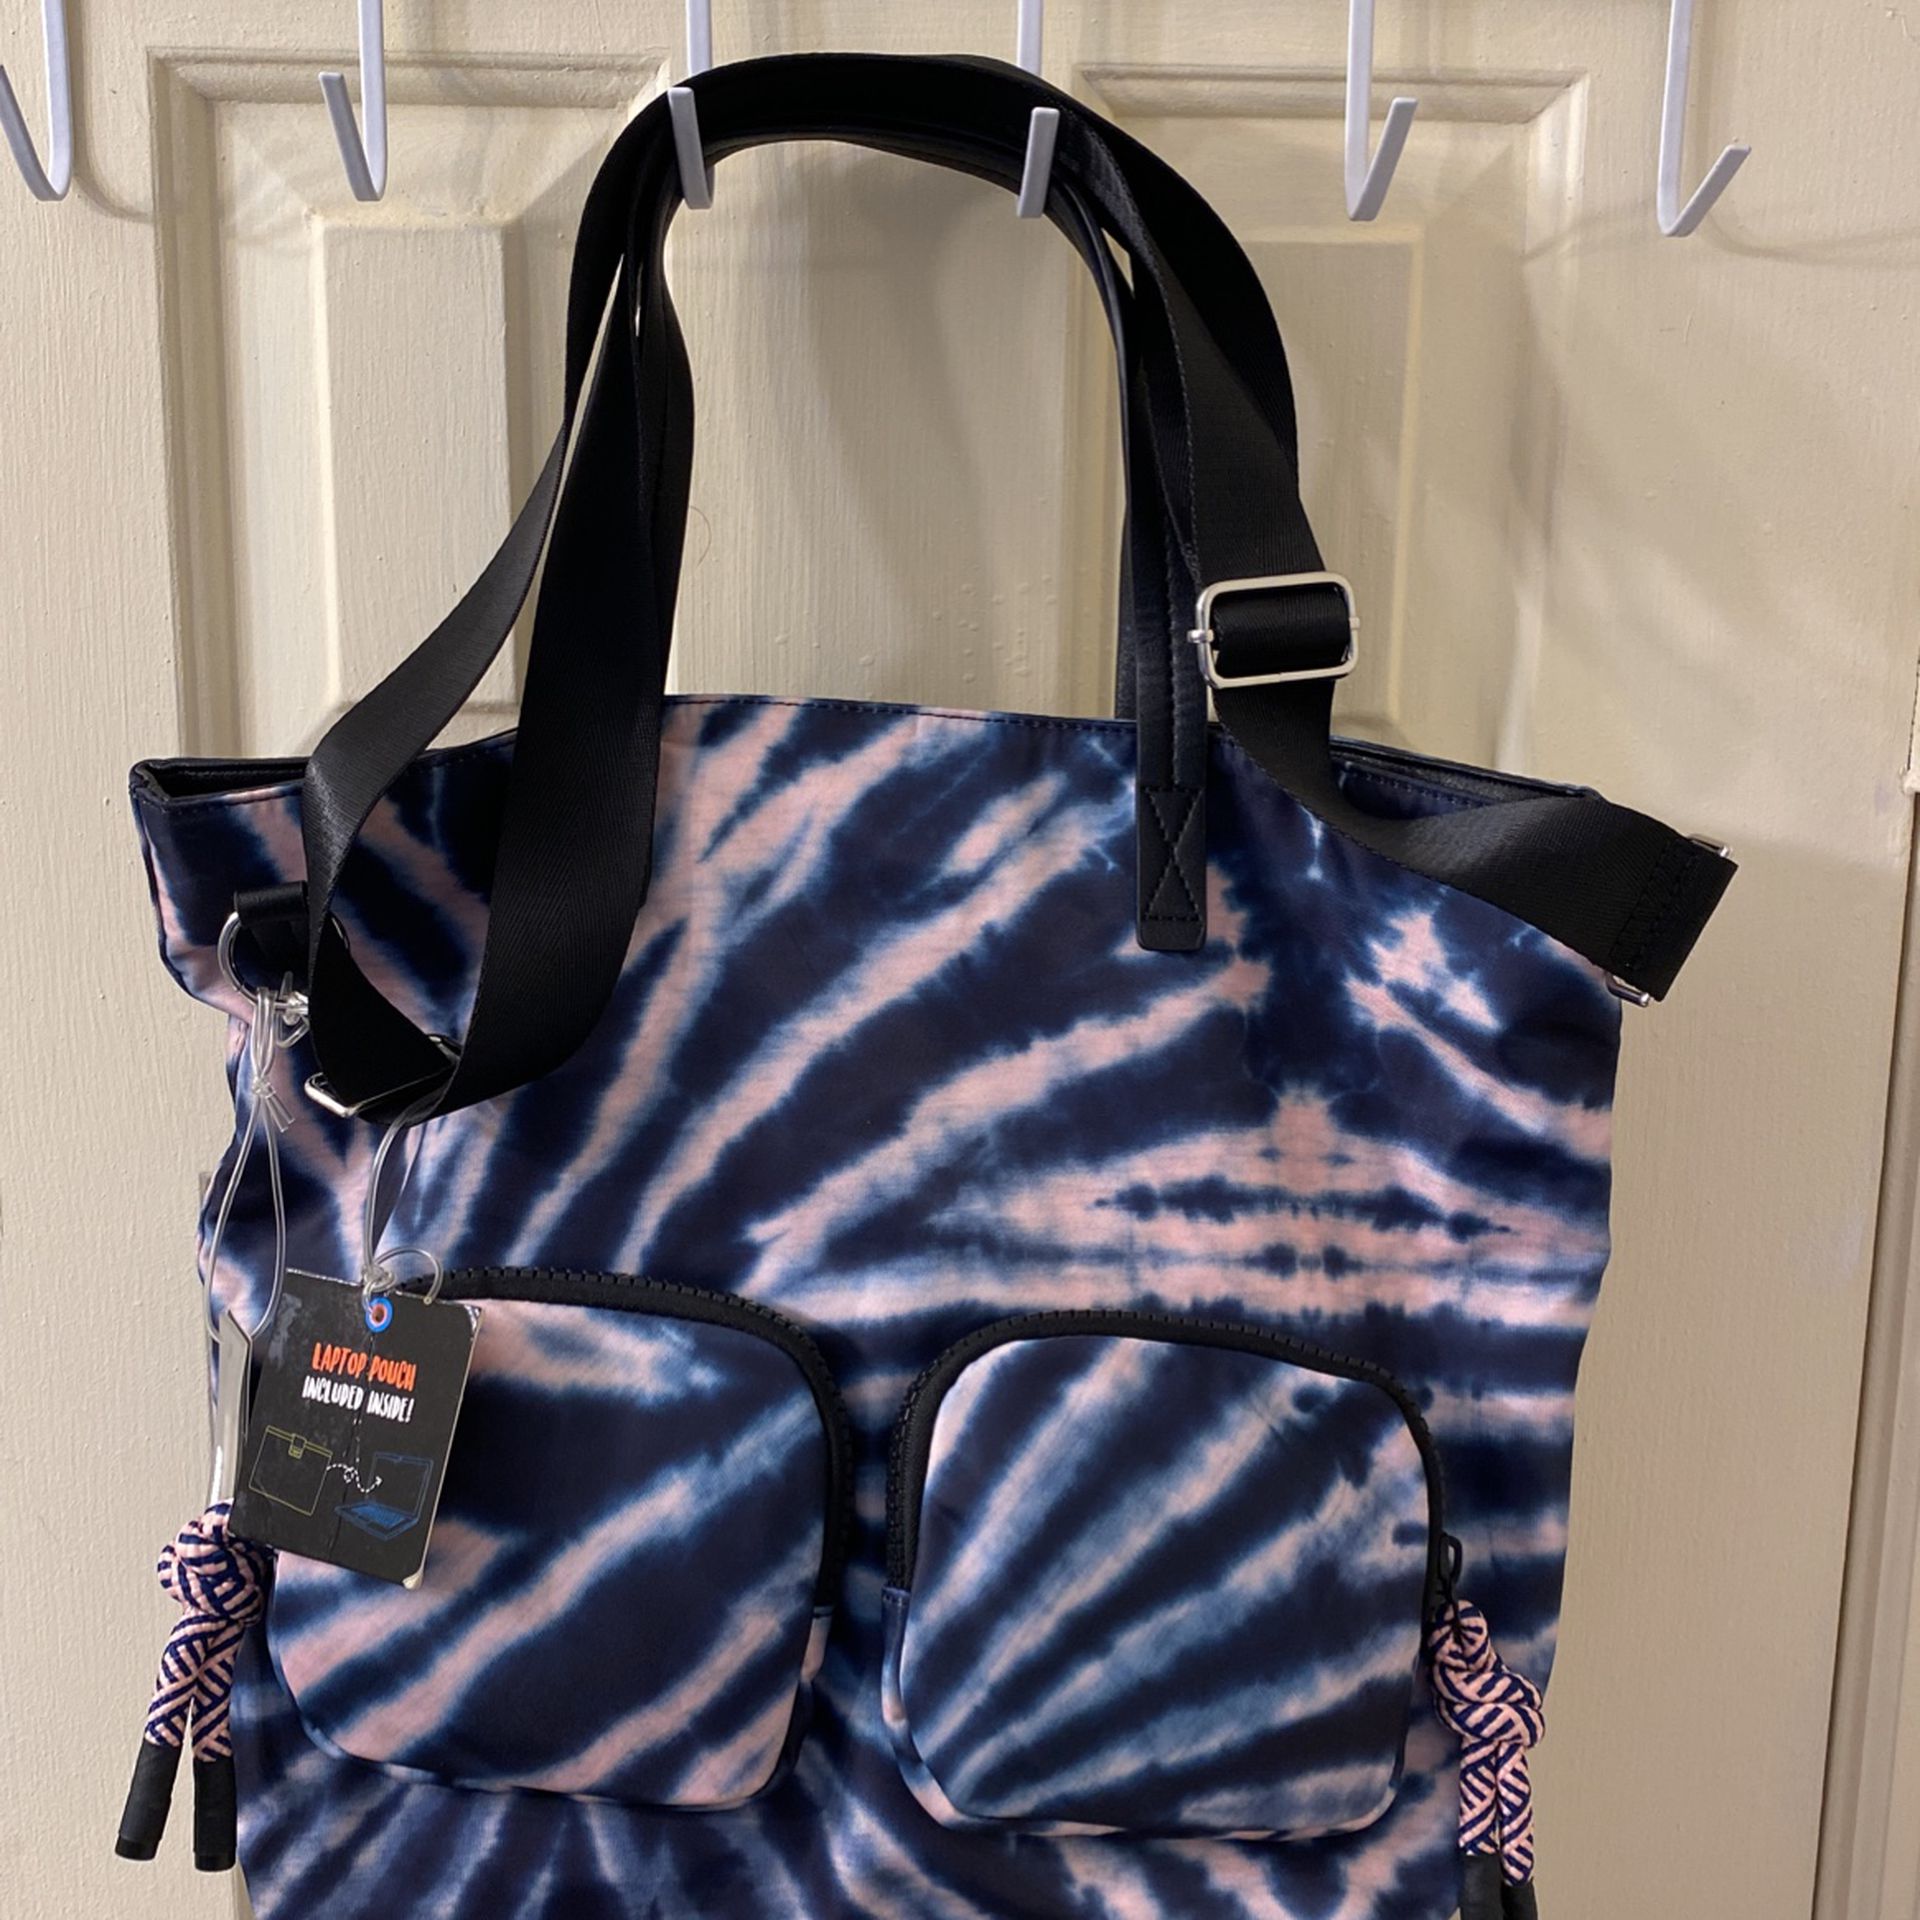 Like Dreams Laptop Bag Laptop Pouch Included Inside 2front Pockets Tote $25 C My Other Bags Ty 